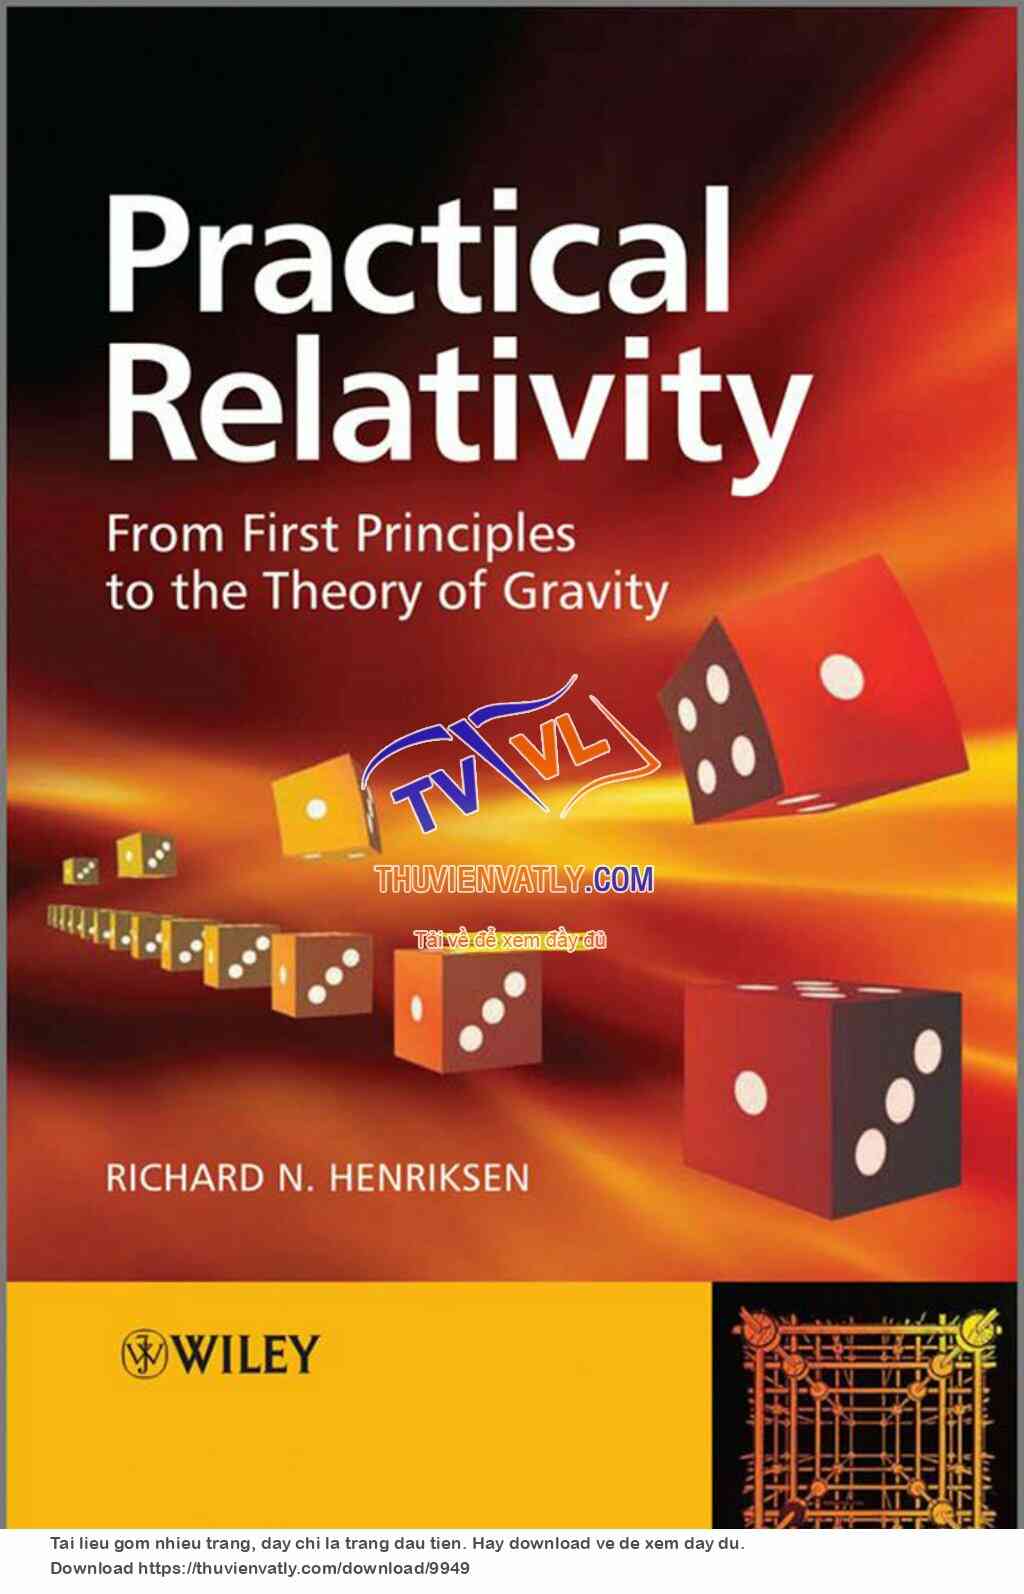 Practical Relativity: From First Principles to the Theory of Gravity